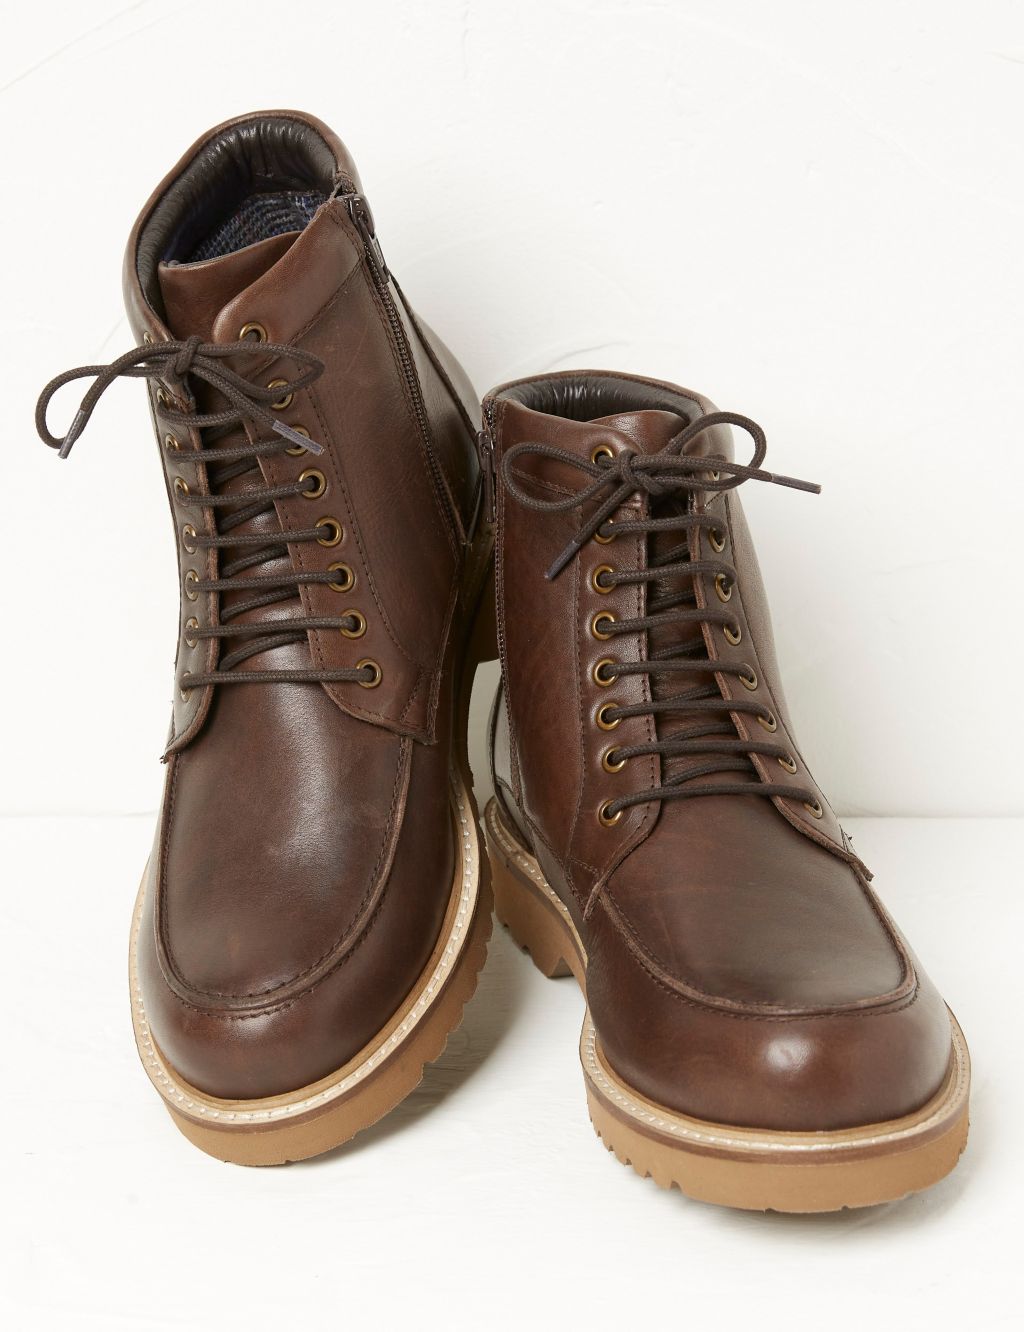 Leather Side Zip Casual Boots image 2